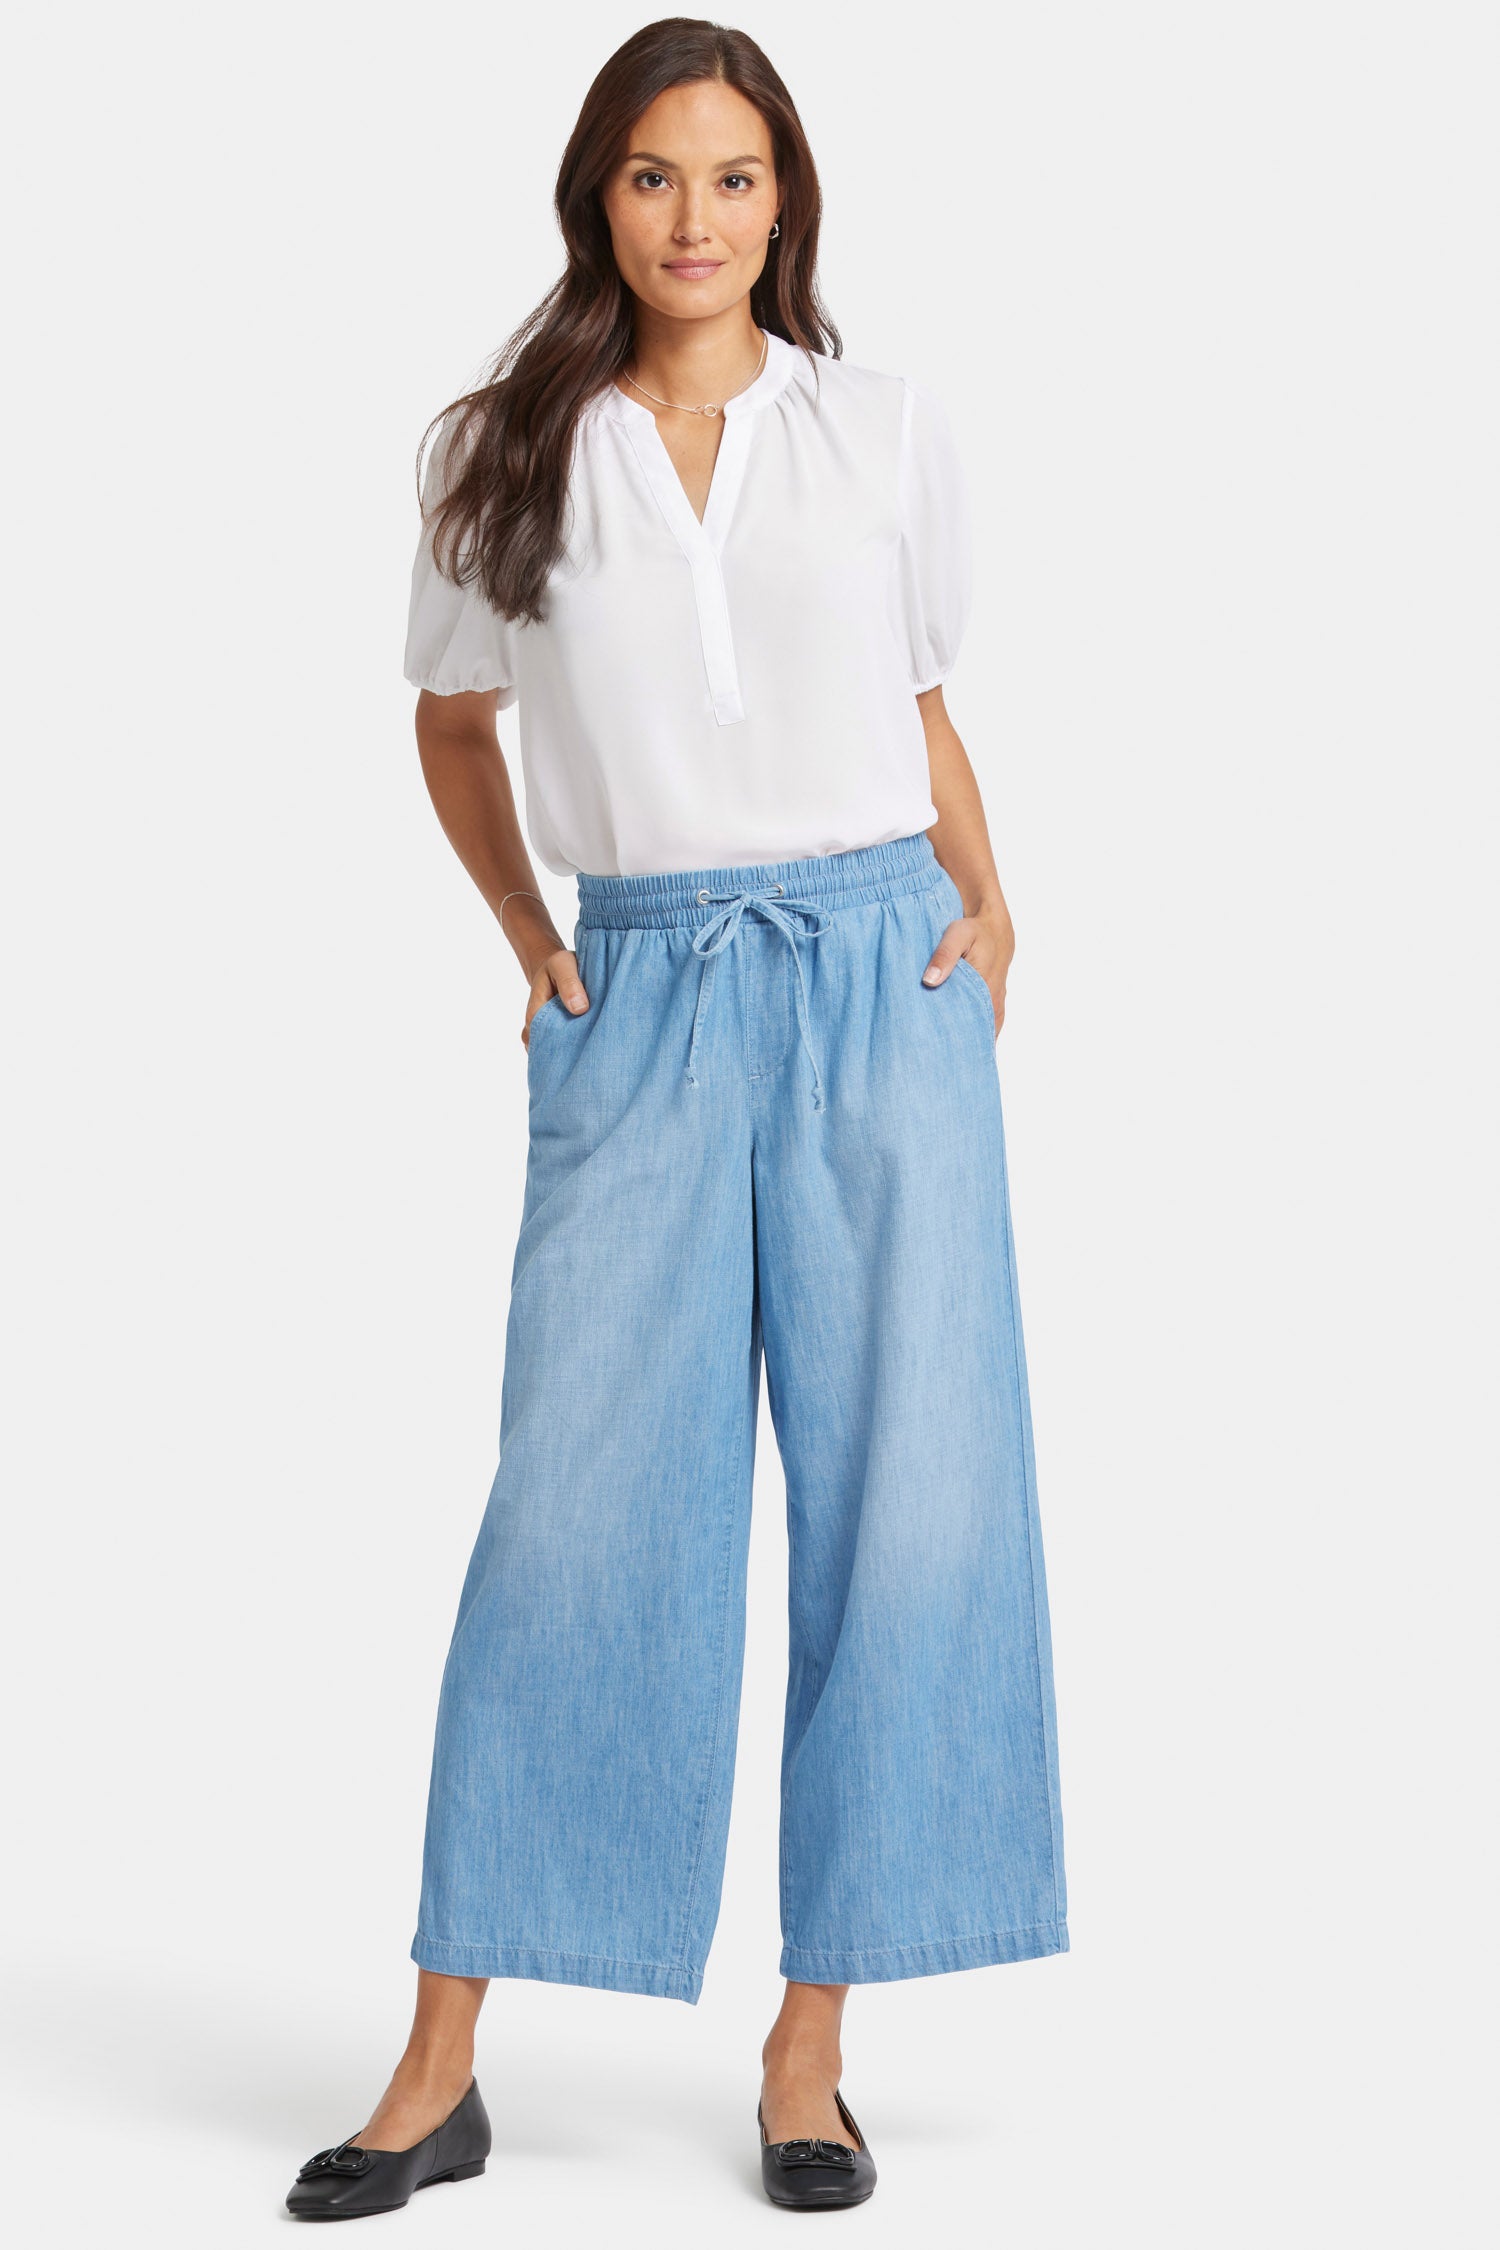 A New Day Women's High-Rise Ruffle Waisted Pull-On Ankle Pants